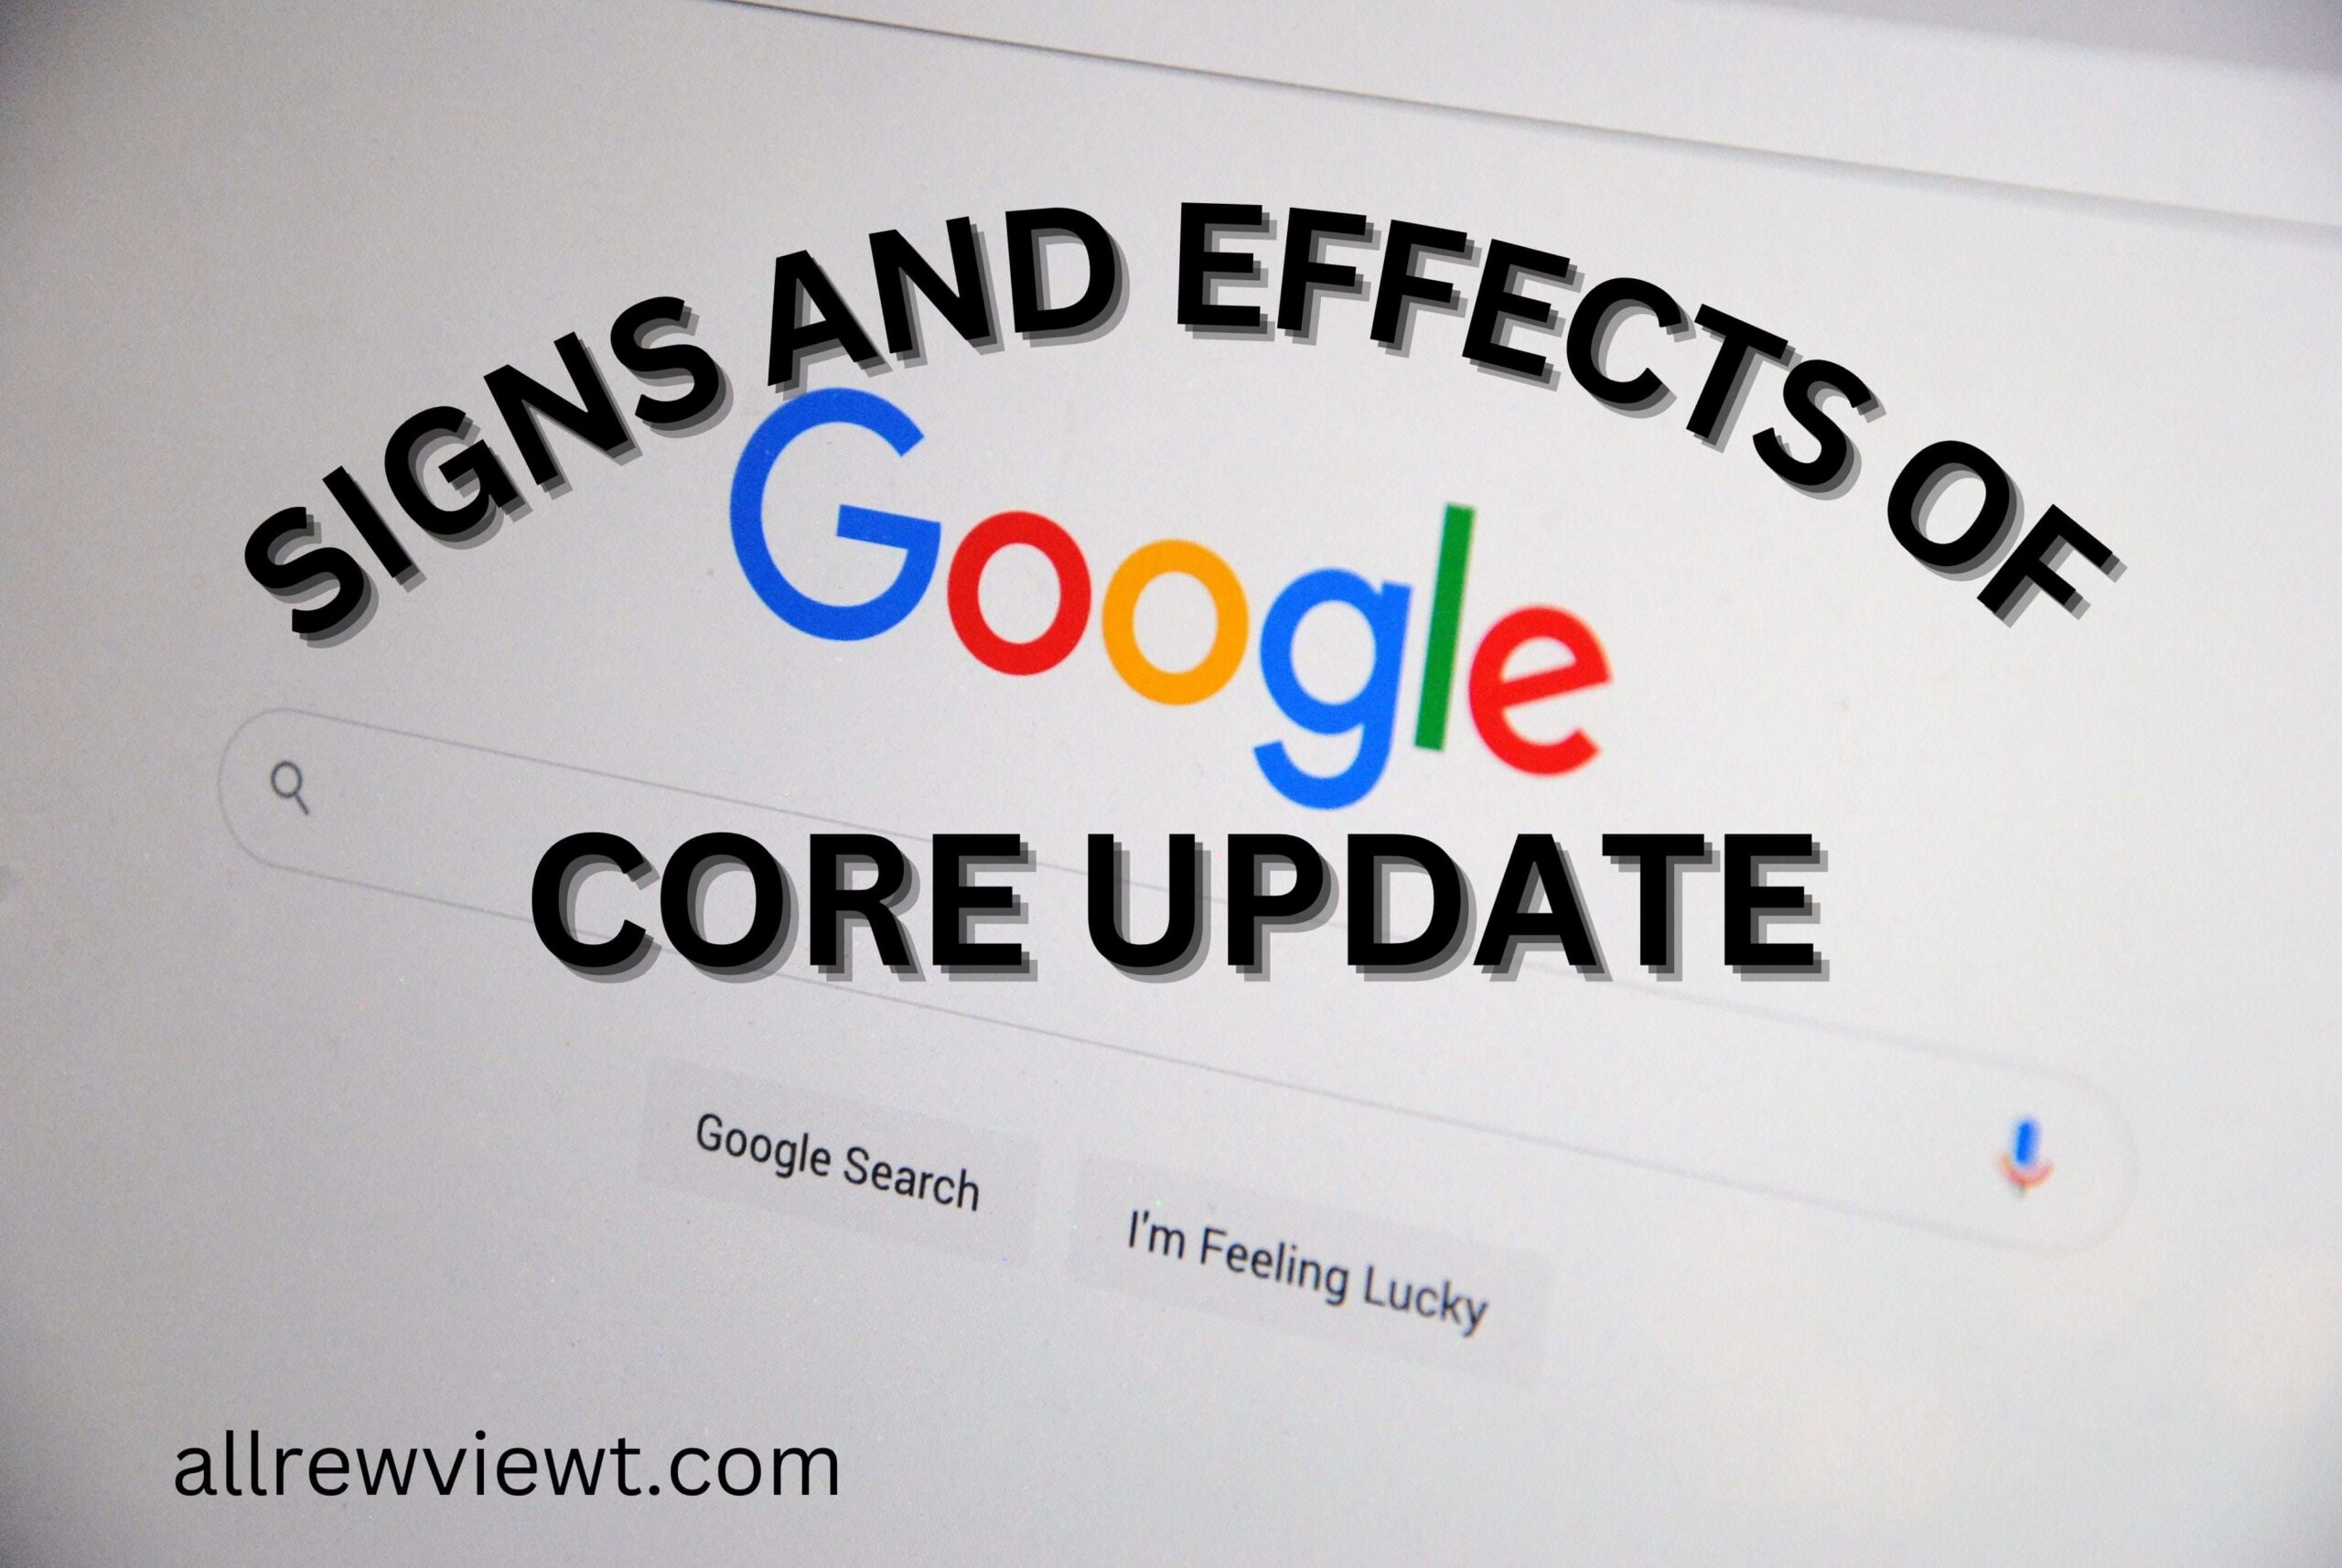 The signs and effects of the google core update